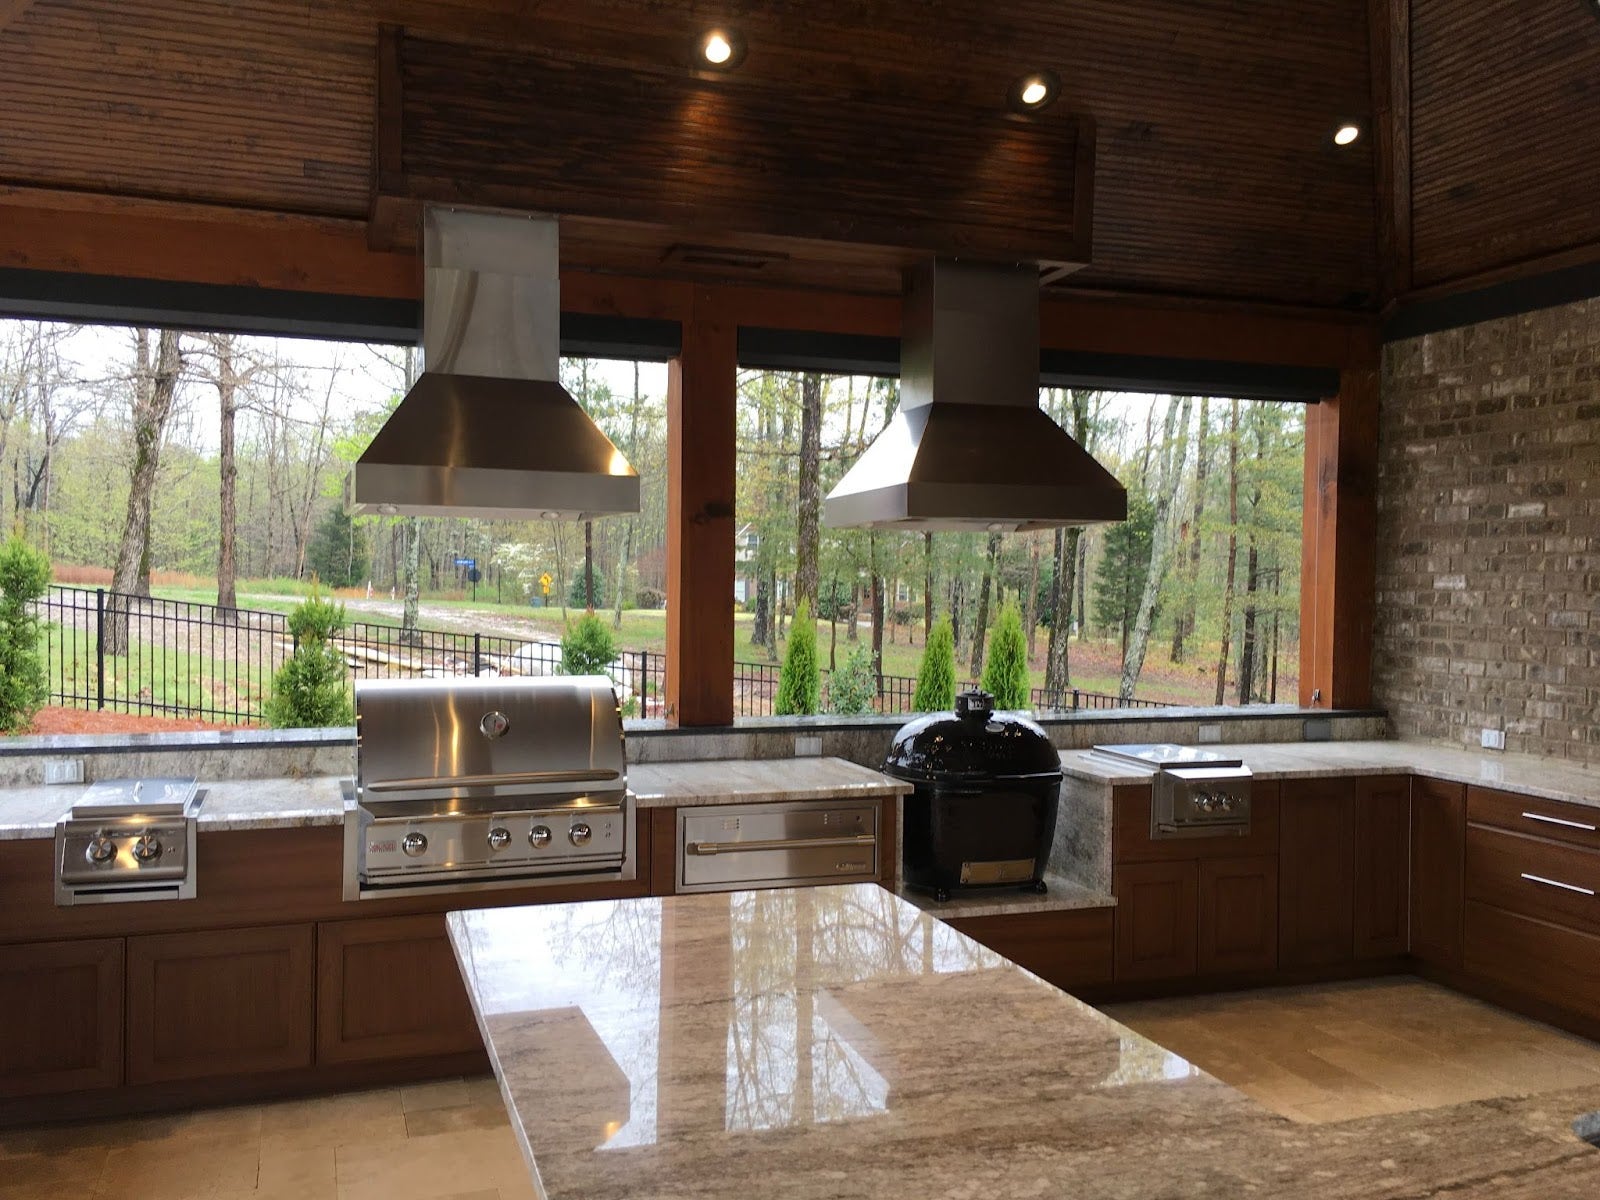 Luxurious and fully-fitted outdoor kitchen with dual extraction units, modern appliances, and wooden storage, surrounded by a tranquil woodland setting. - Proline Range Hoods - prolinerangehoods.com 